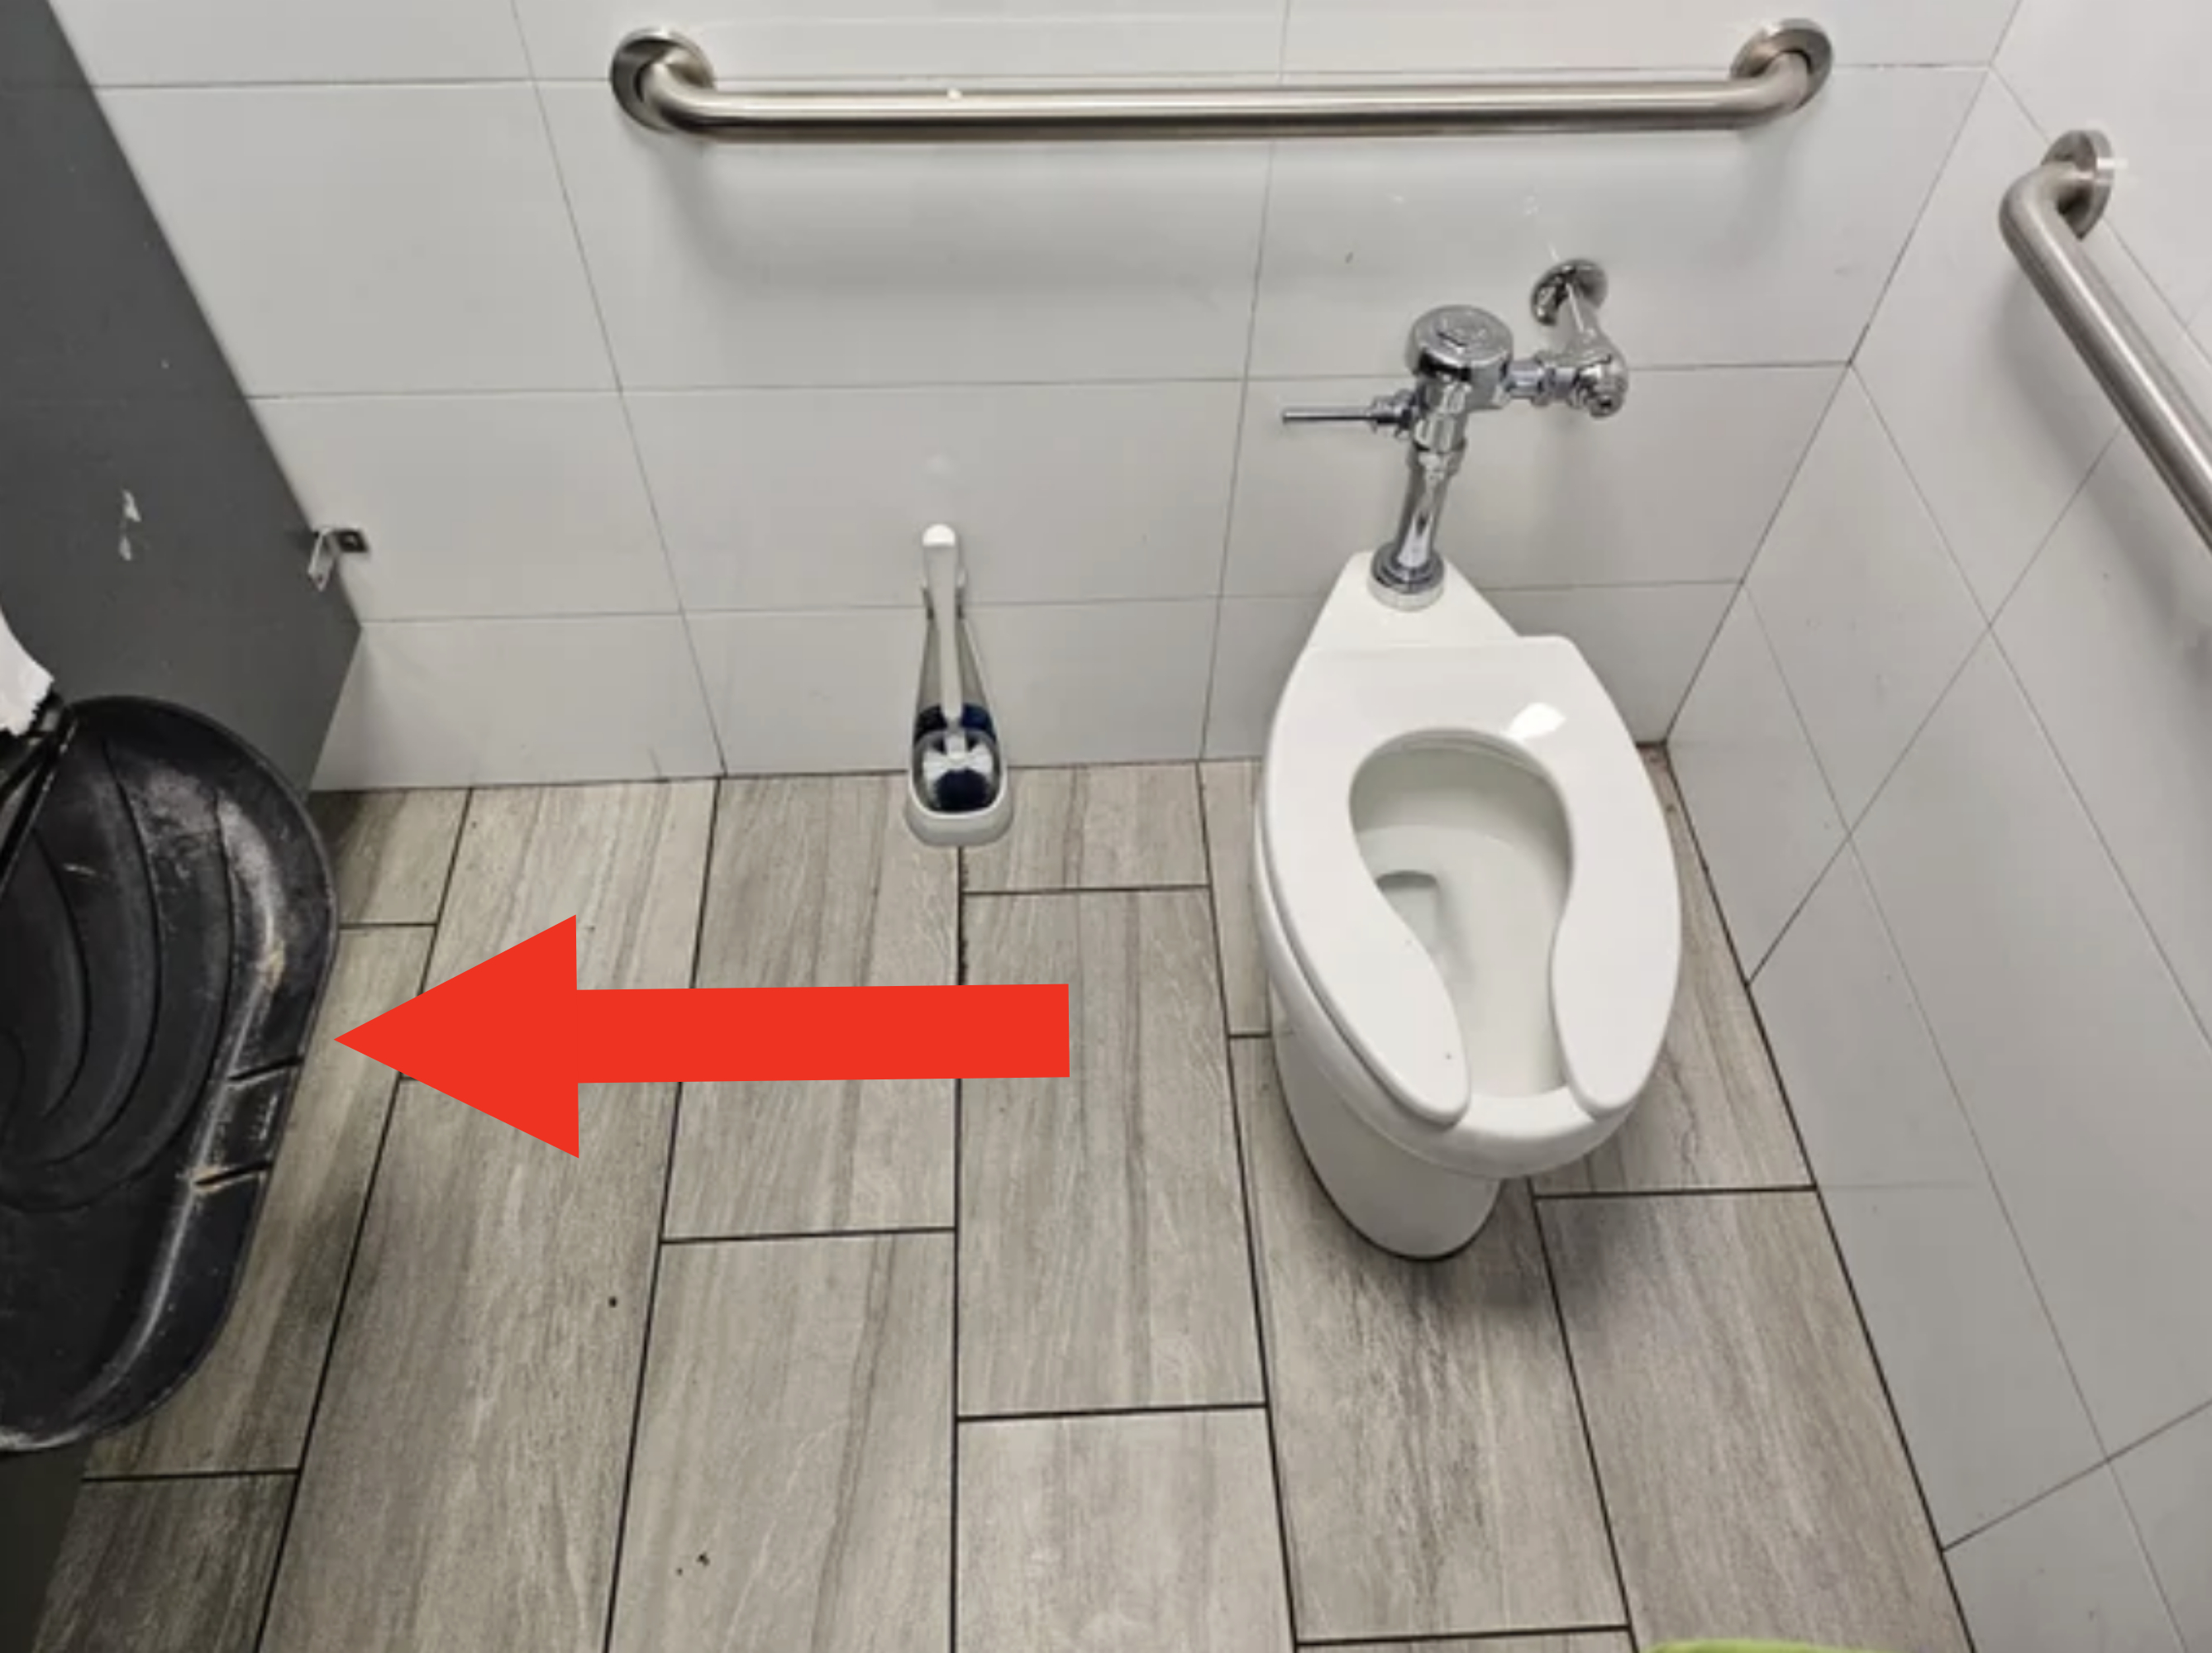 Overhead view of the distance between the toilet bowl and the dispenser